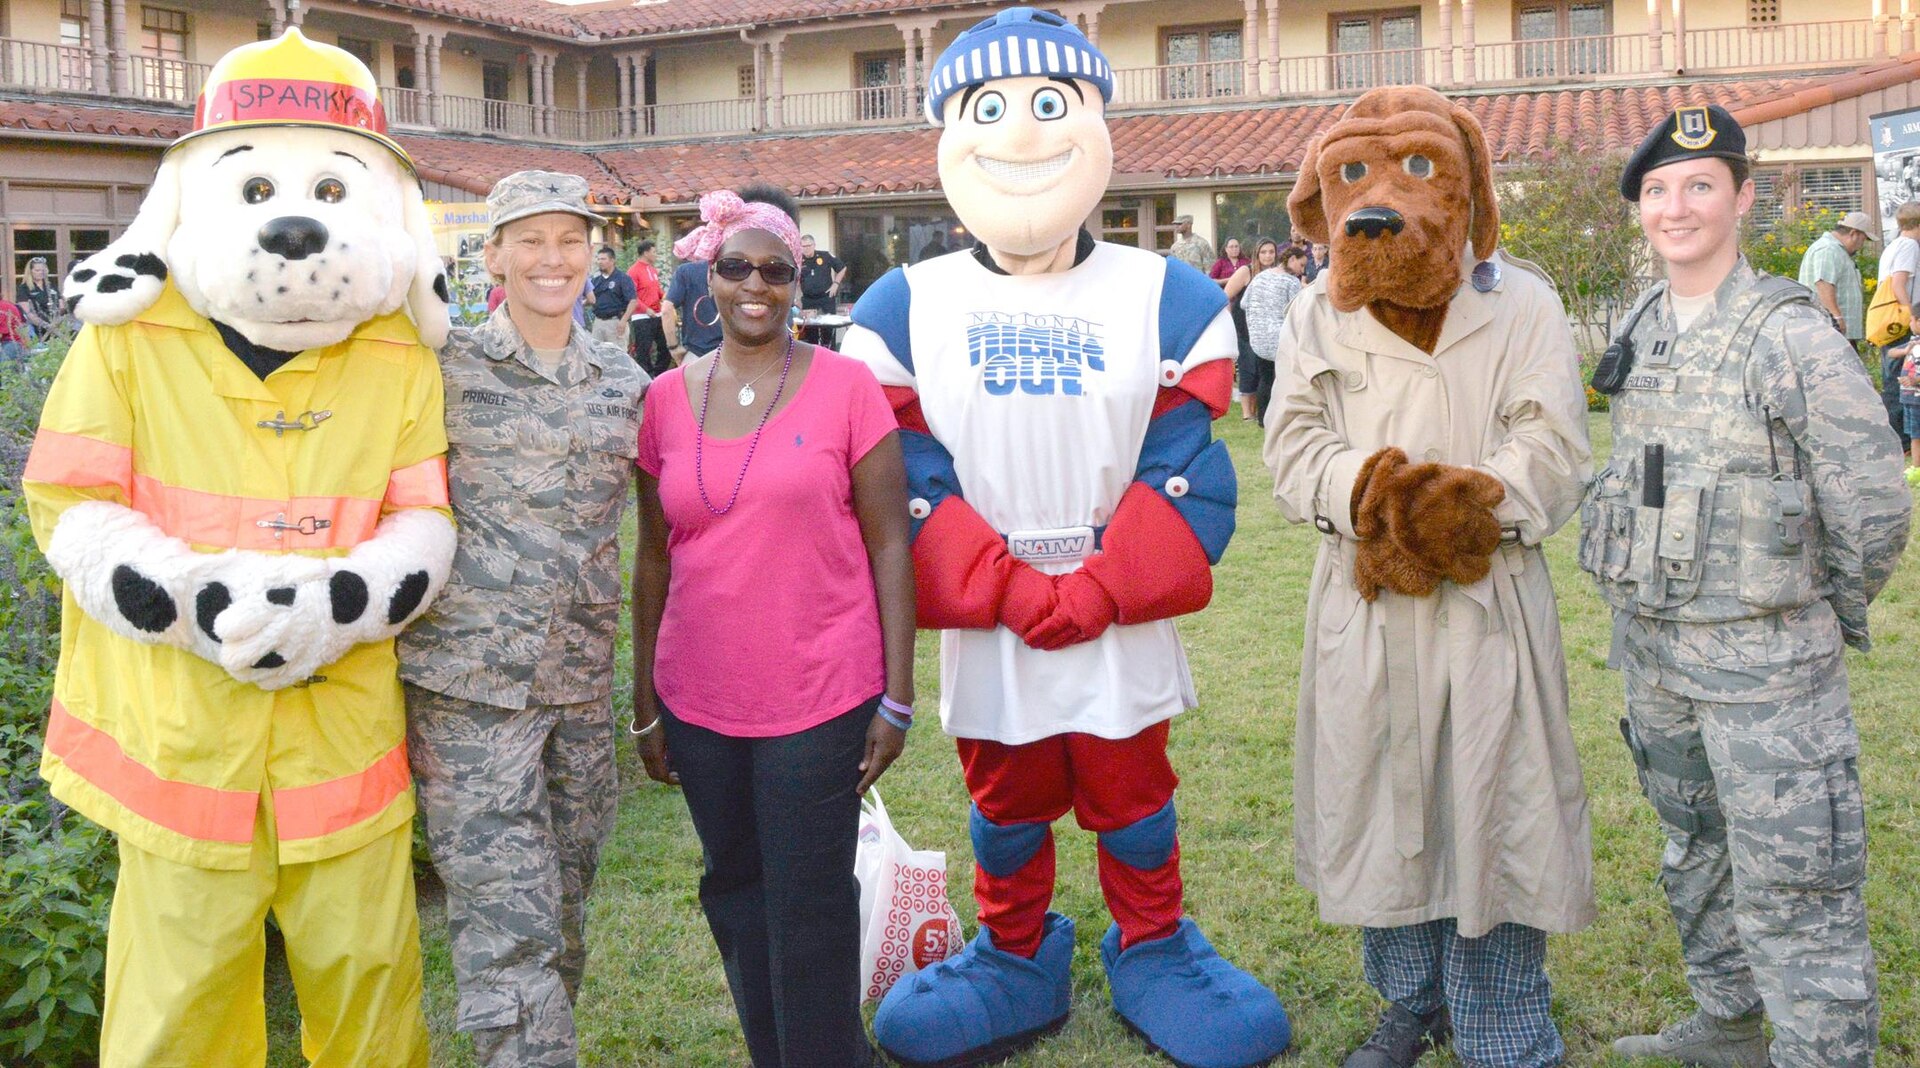 Brig. Gen. Heather L. Pringle (second from left) is joined by (from left) Sparky the Fire Dog; Paula Boykin, 502nd SFLSG budget analyst/resource advisor; Scout the National Night Out Mascot; McGruff the Crime Dog; and Capt. Julie Roloson, 502nd Security Forces Squadron operations officer, during the National Night Out celebration at the Lincoln Family Housing headquarters at 2739 Dickman Drive at JBSA-Fort Sam Houston Oct. 4.